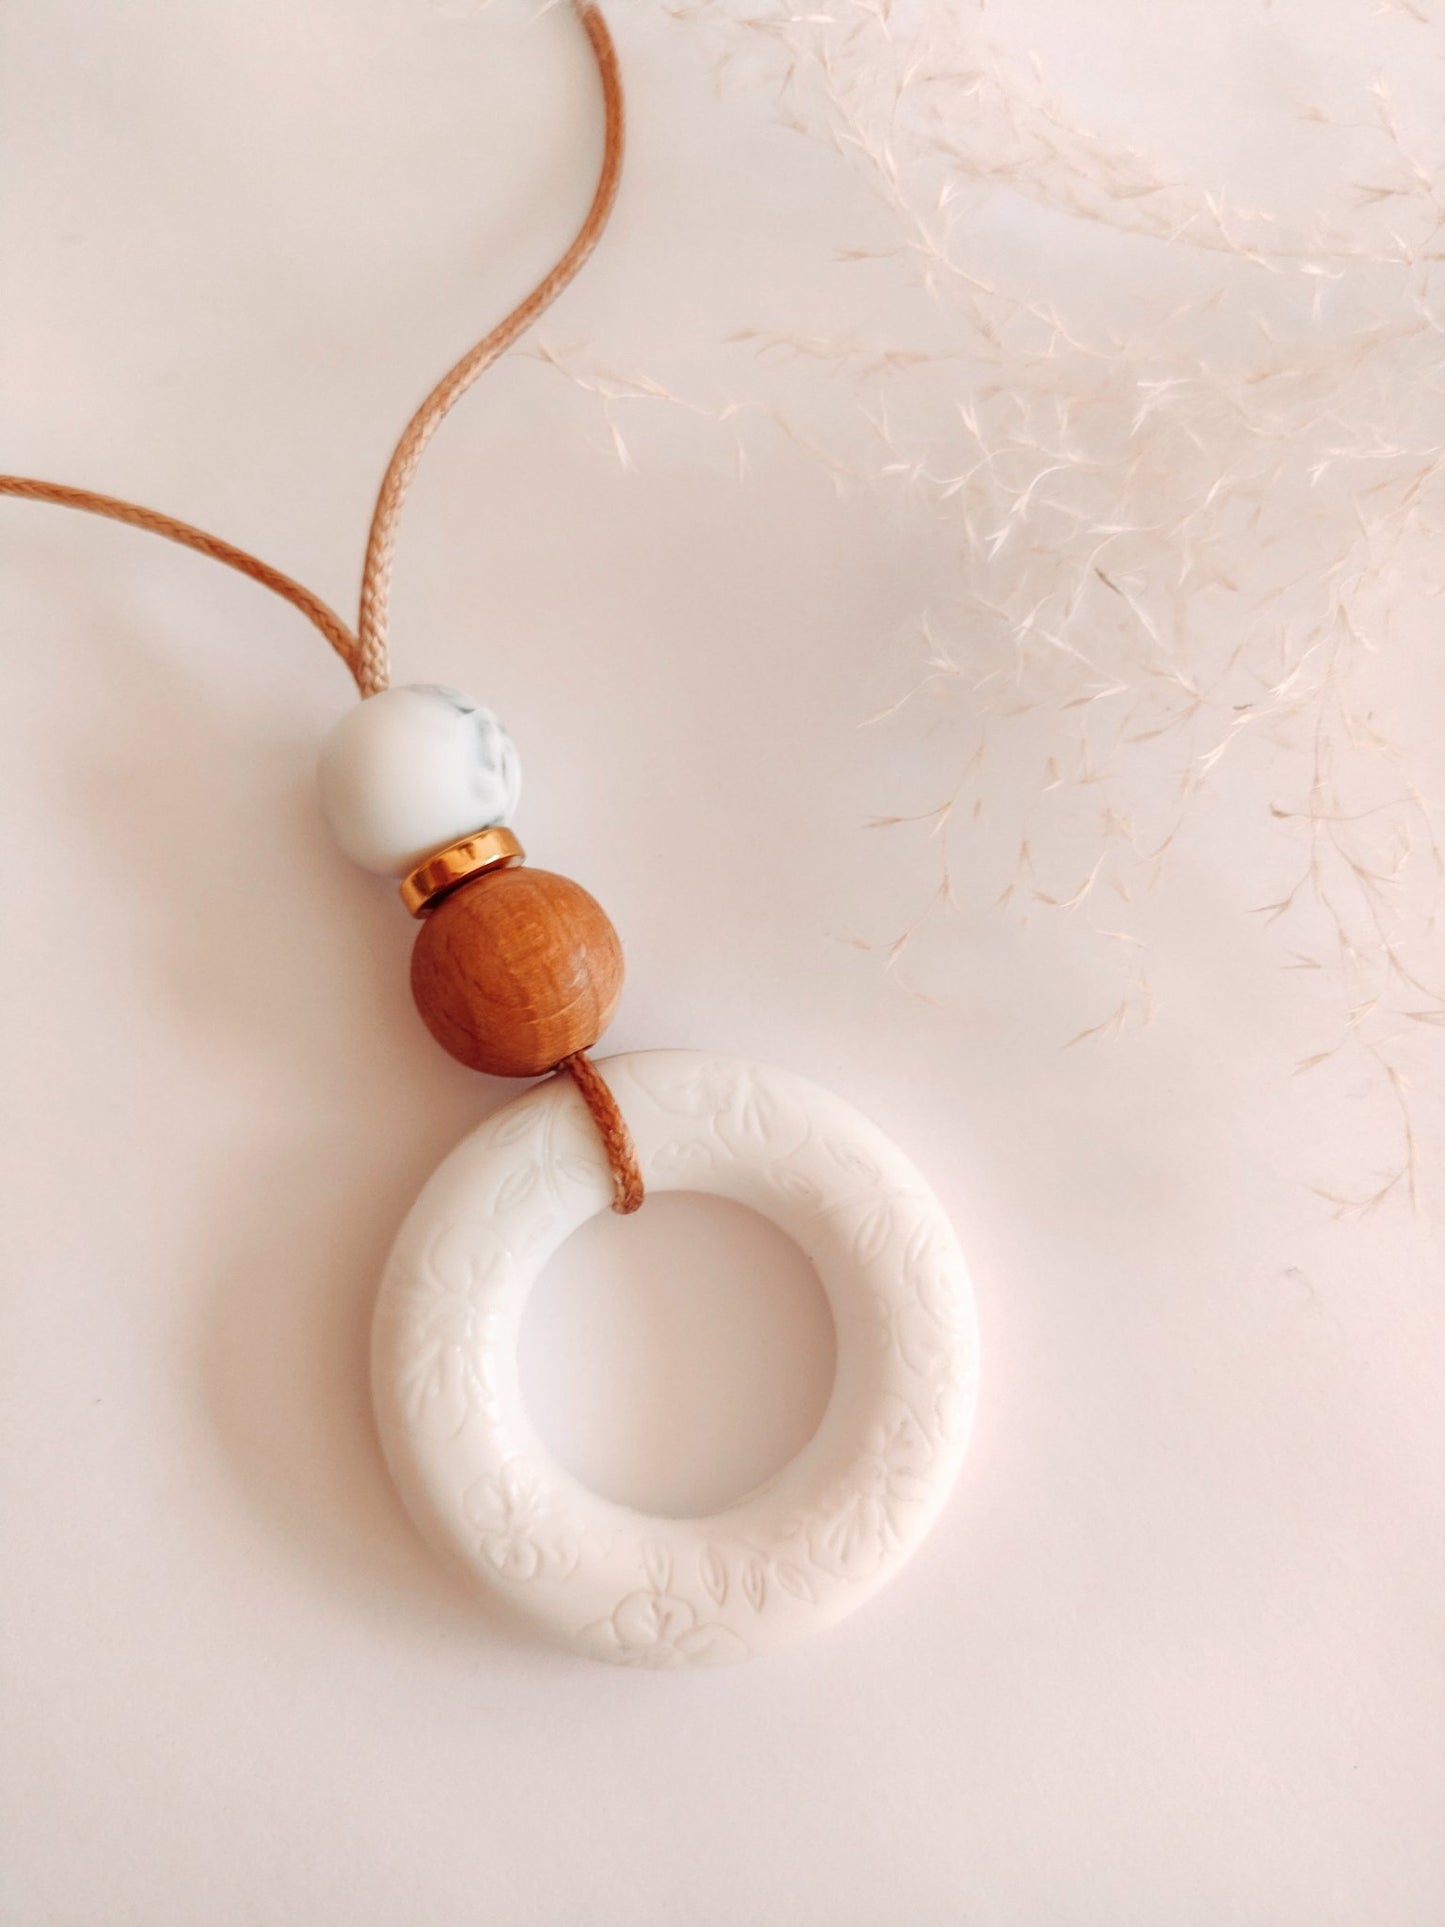 Embossed Soft Bloom white Pendant - Bennie Blooms Breastfeeding, Teething and Fiddle Jewellery at its finest.